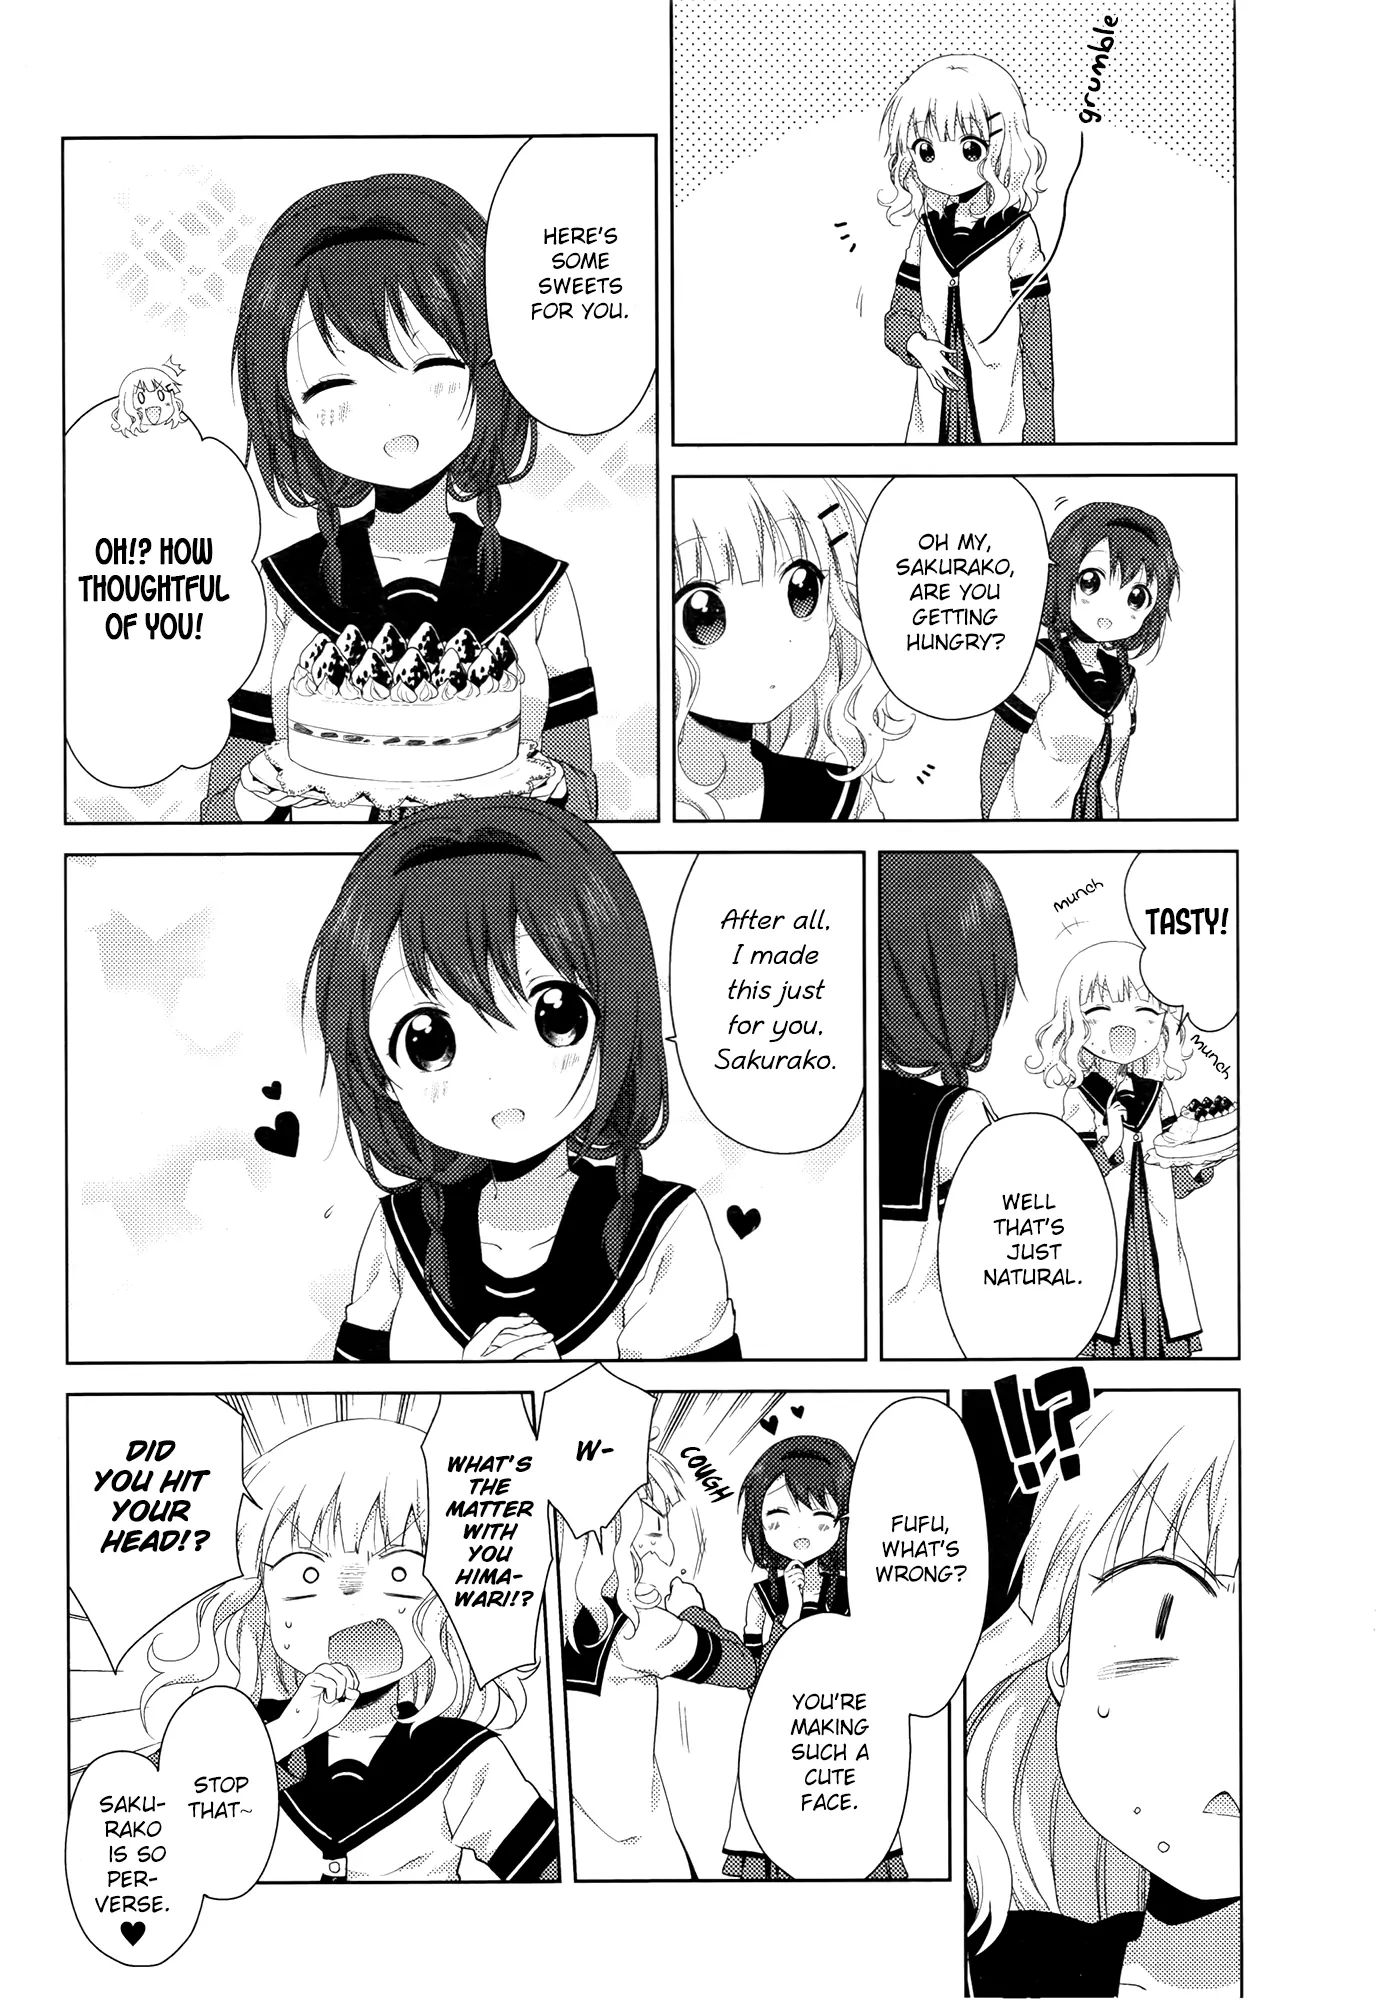 Yuru Yuri Vol.12 Chapter 85: A Dreamy Encounter... Is Not What I Want - Picture 3